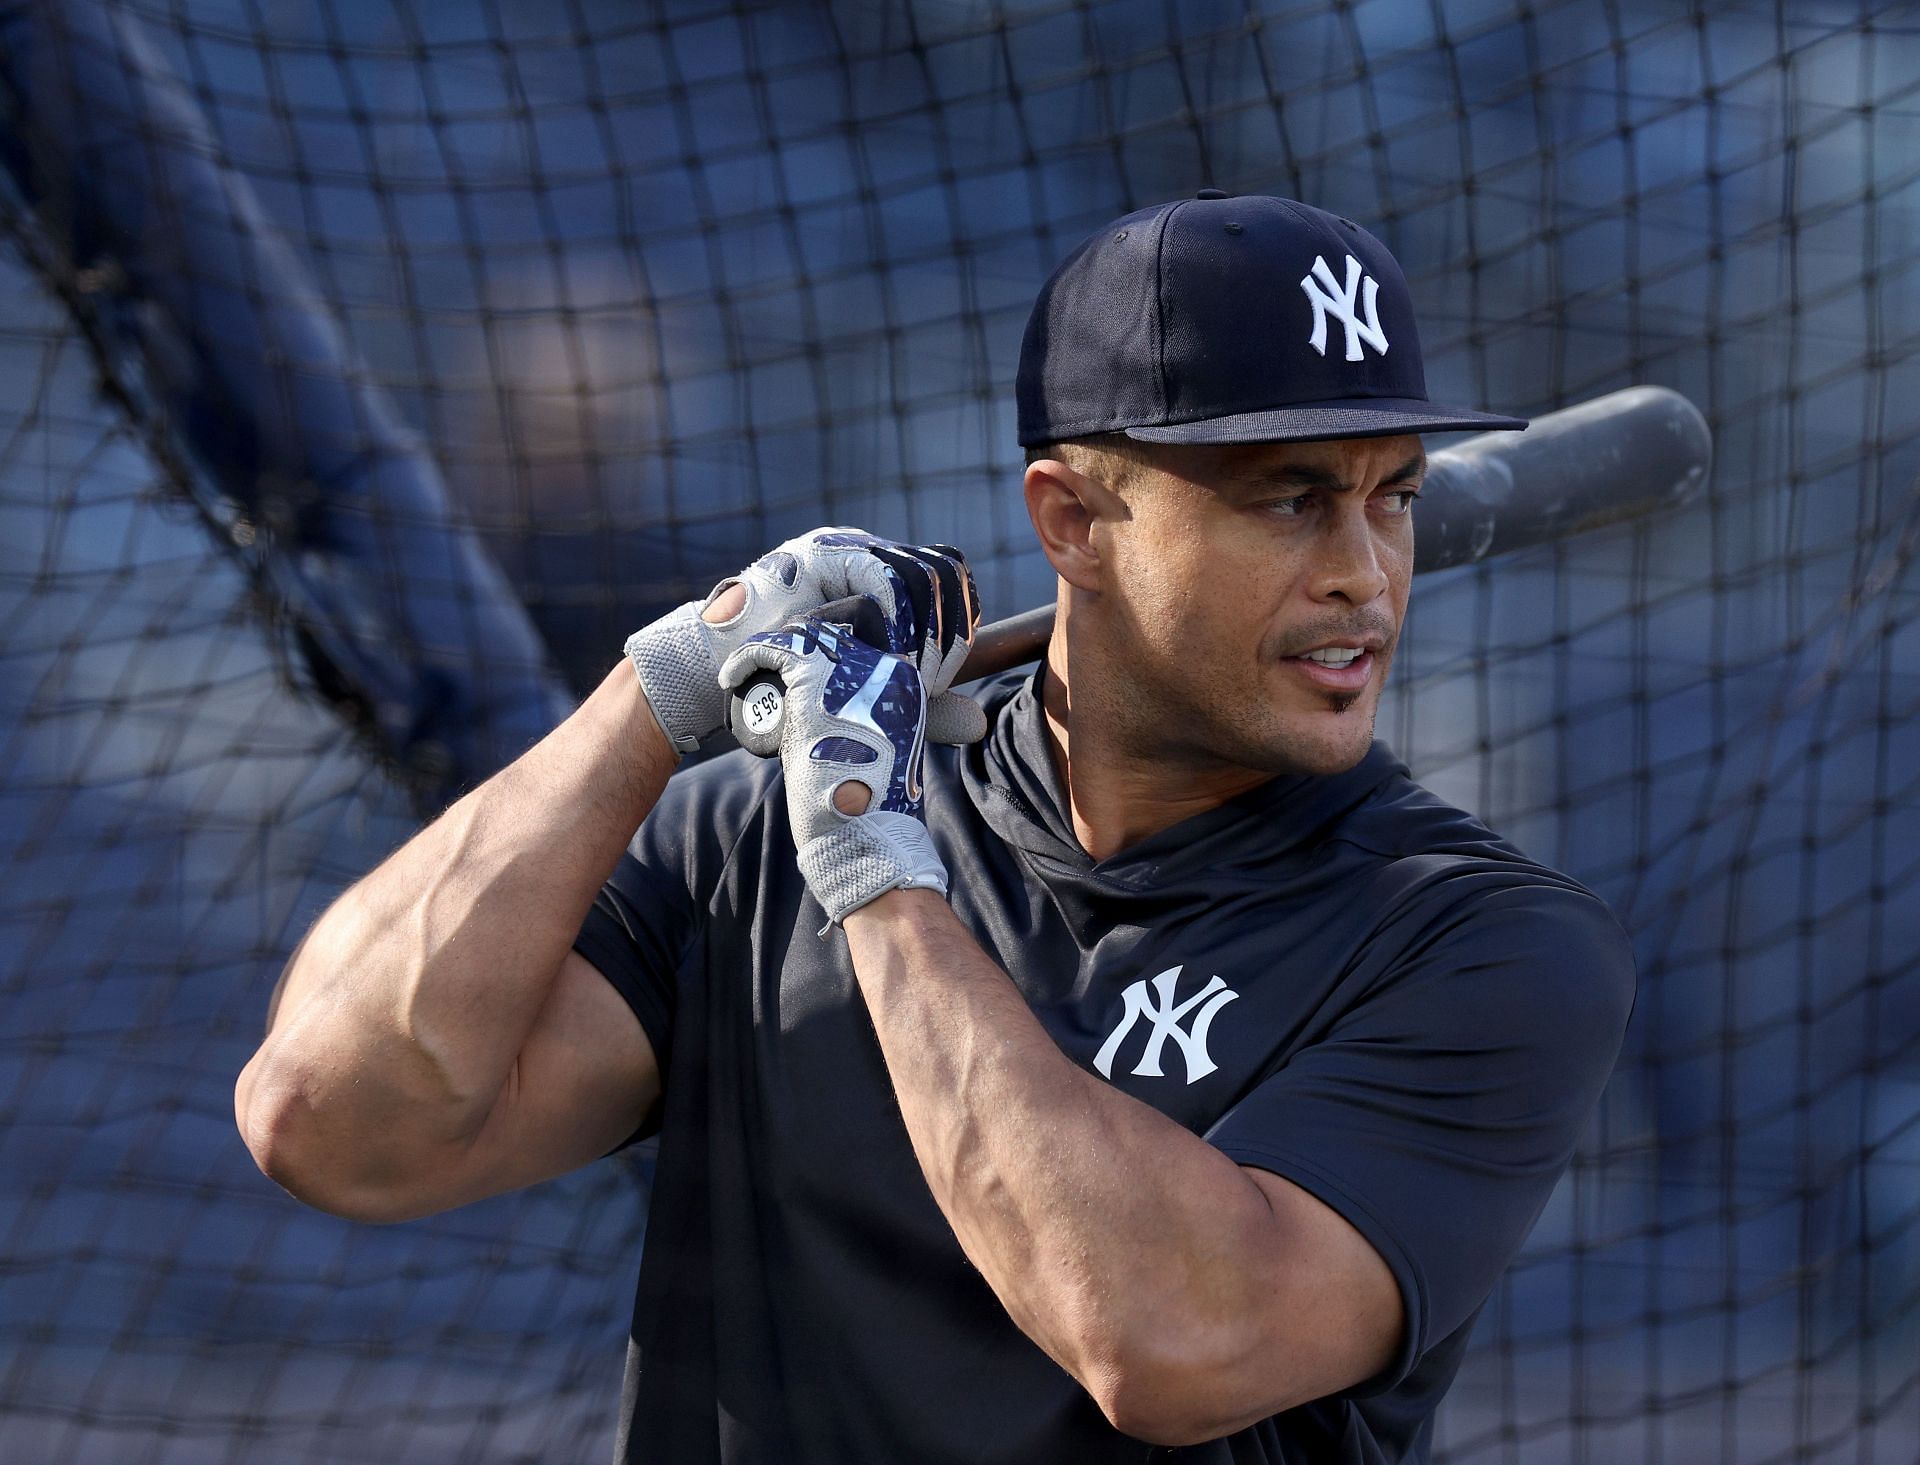 Giancarlo Stanton of the New York Yankees hits during batting practice before the game against the Minnesota Twins at Yankee Stadium